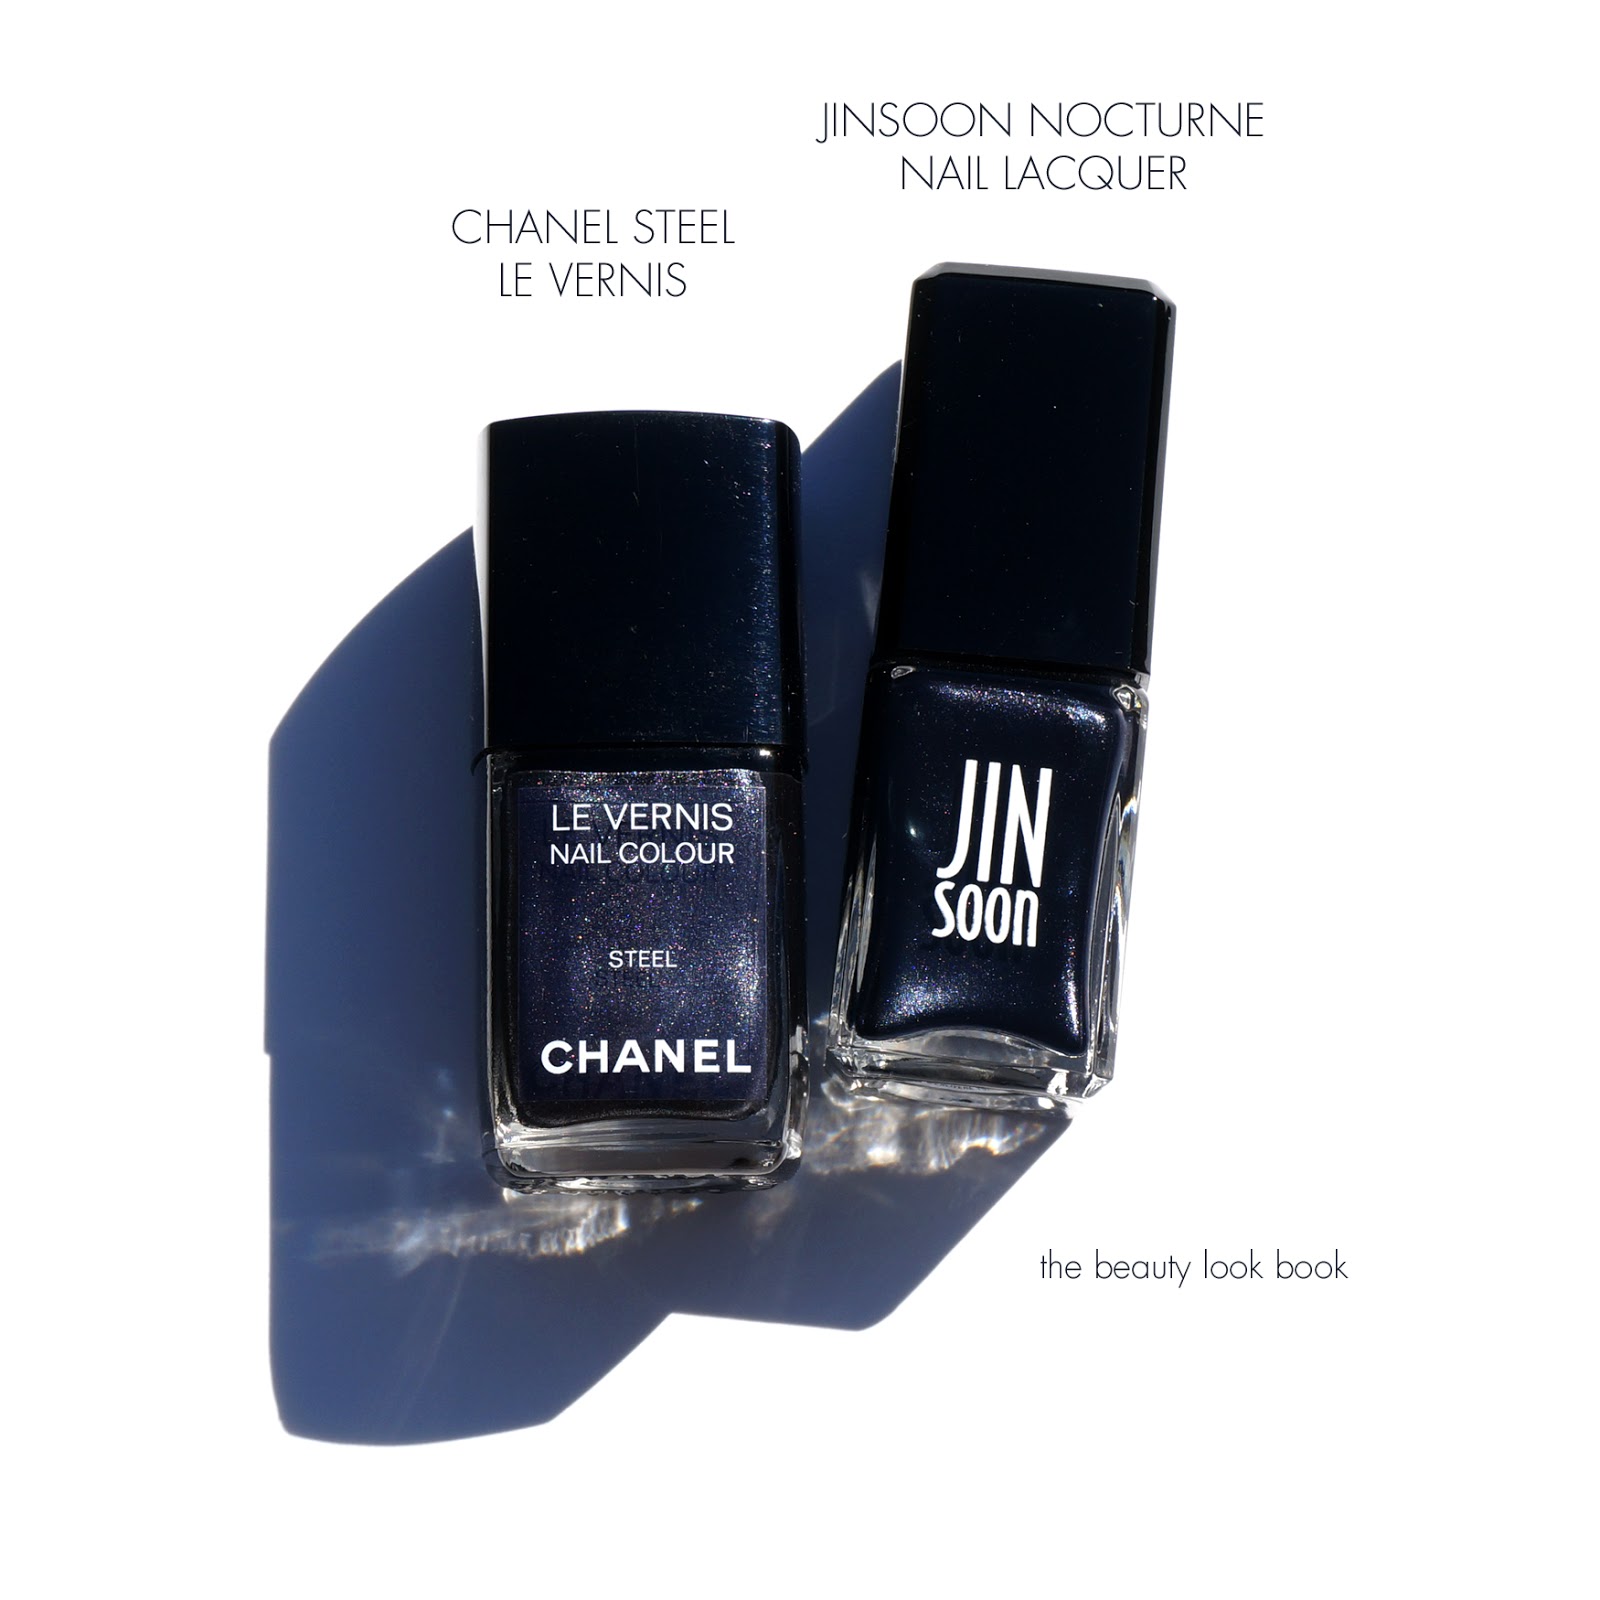 Close Dupe Alert: Chanel Steel Le Vernis and JINsoon Nocturne Nail